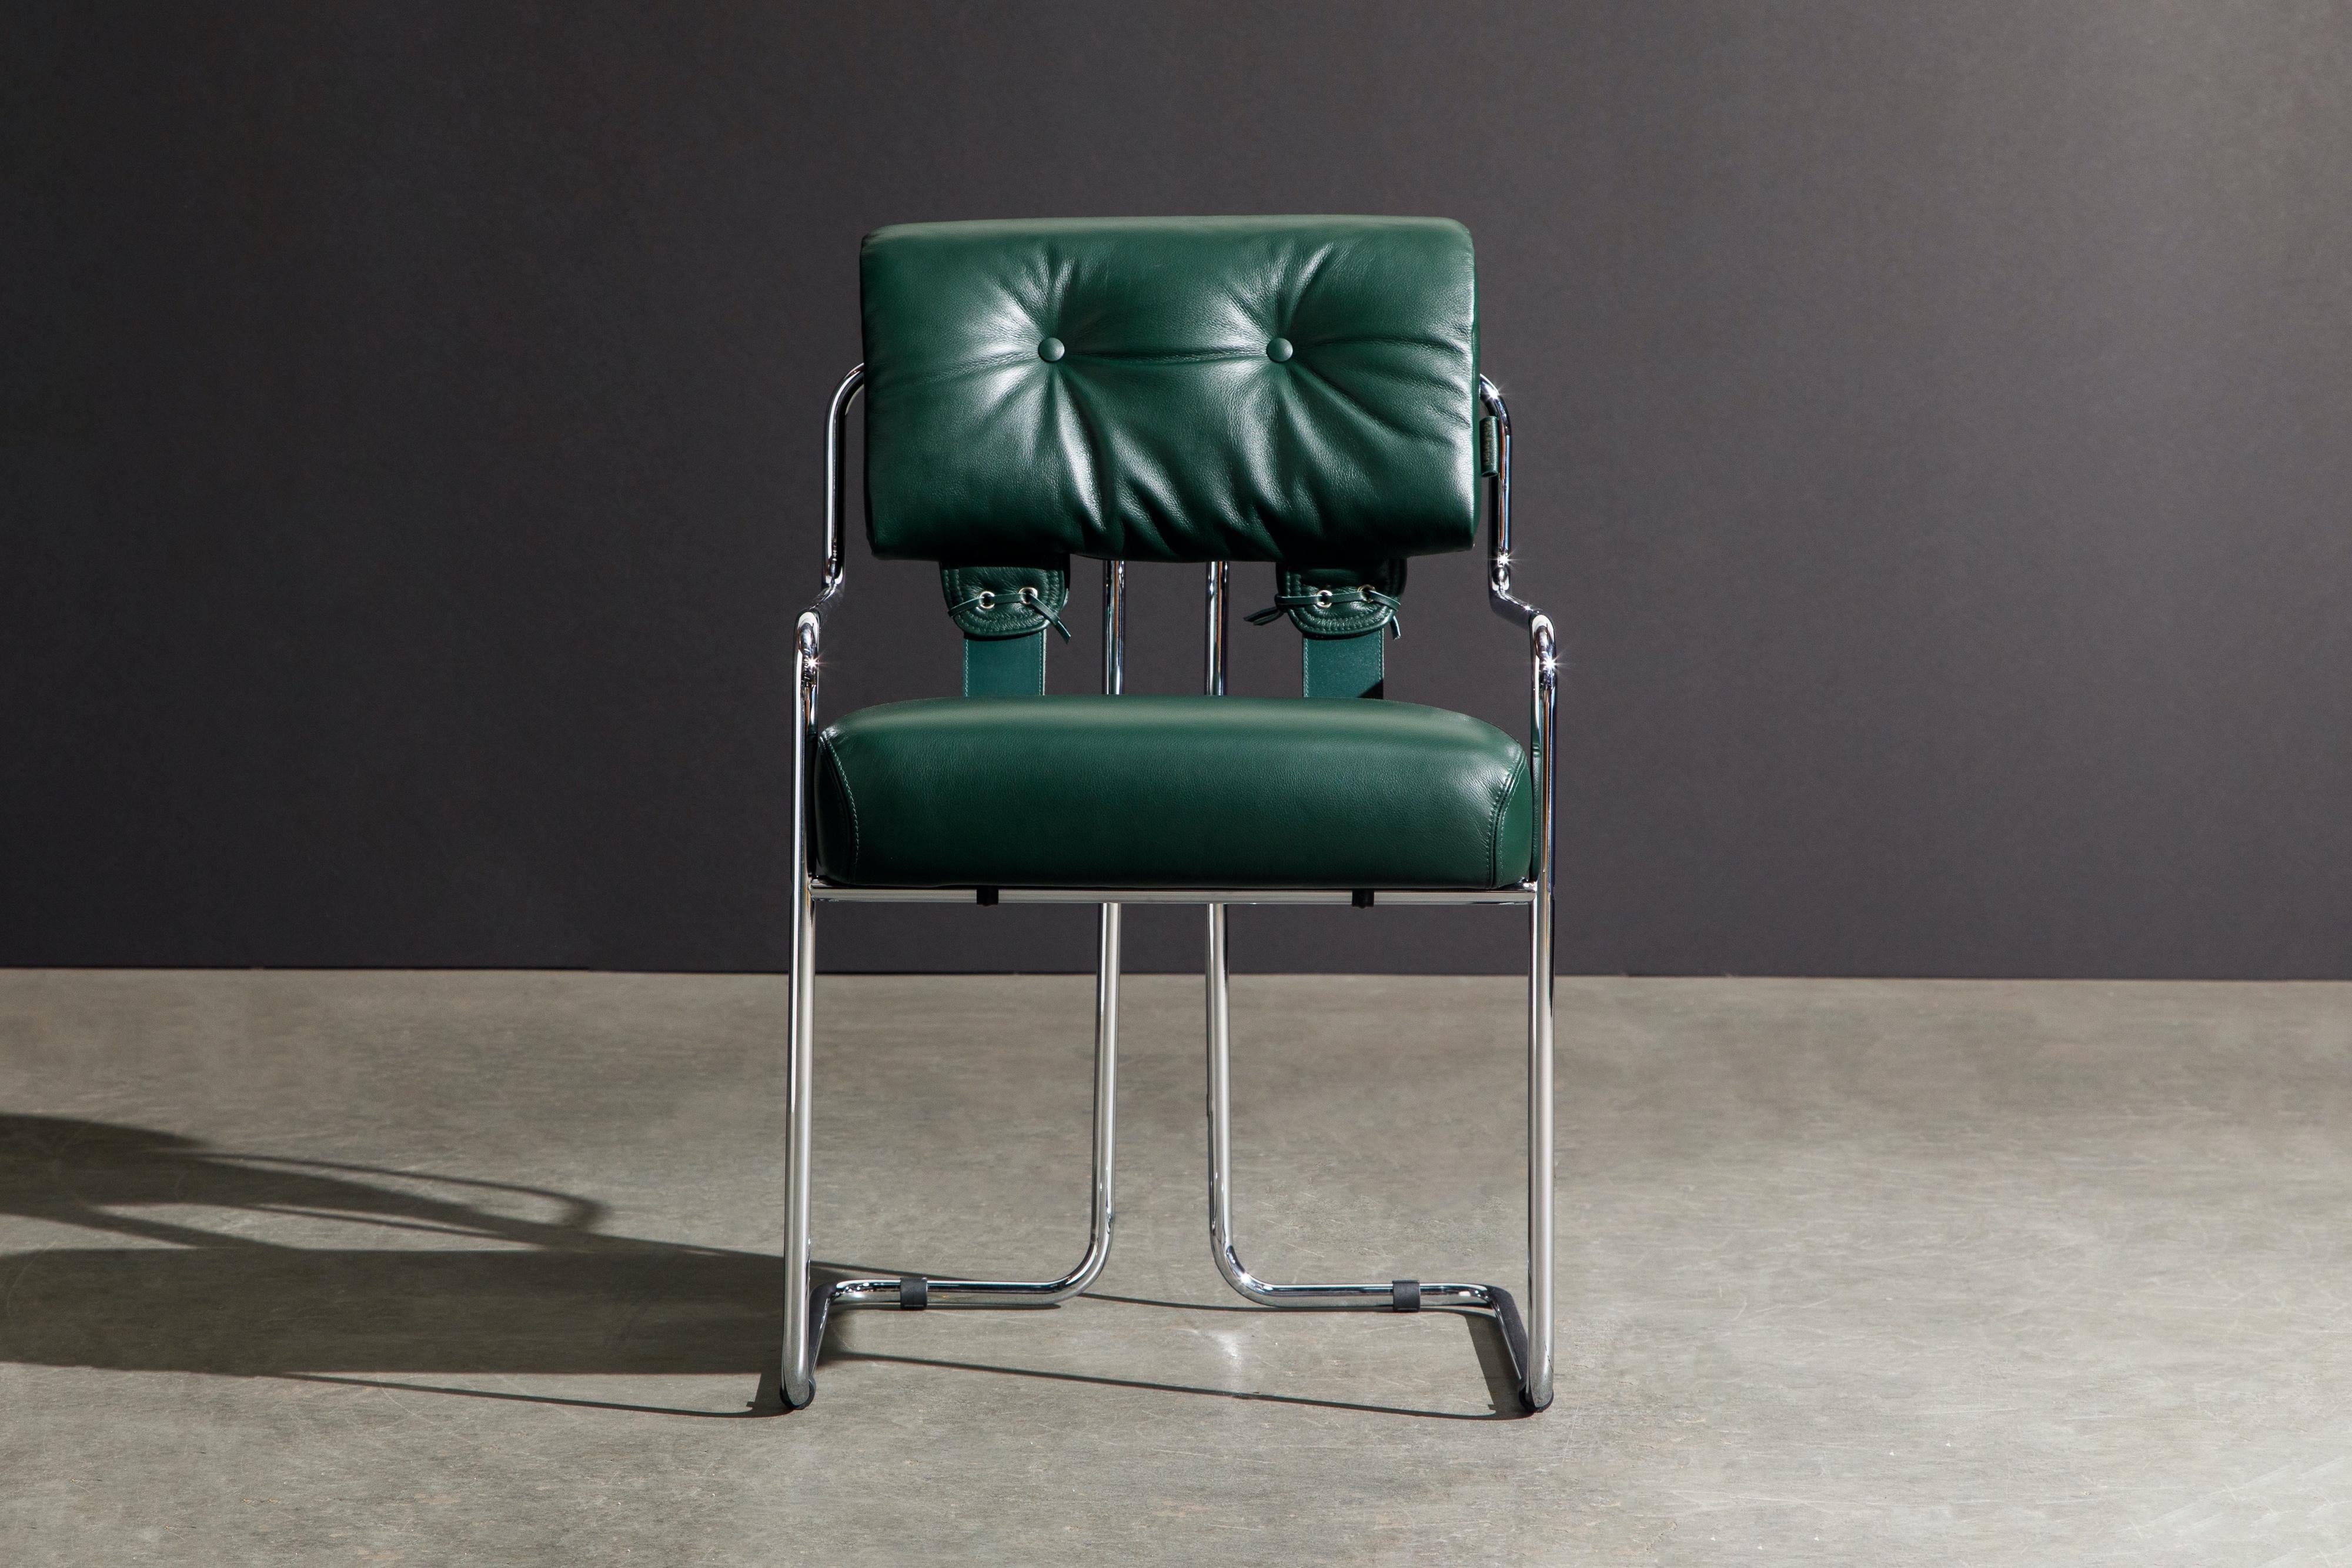 Set of eight (8) Tucroma armchairs (Brand New) in beautiful emerald green leather with polished chrome frames. The seats and backs have supple green leather upholstery and are attached to graceful polished steel tubular frames, as well as being